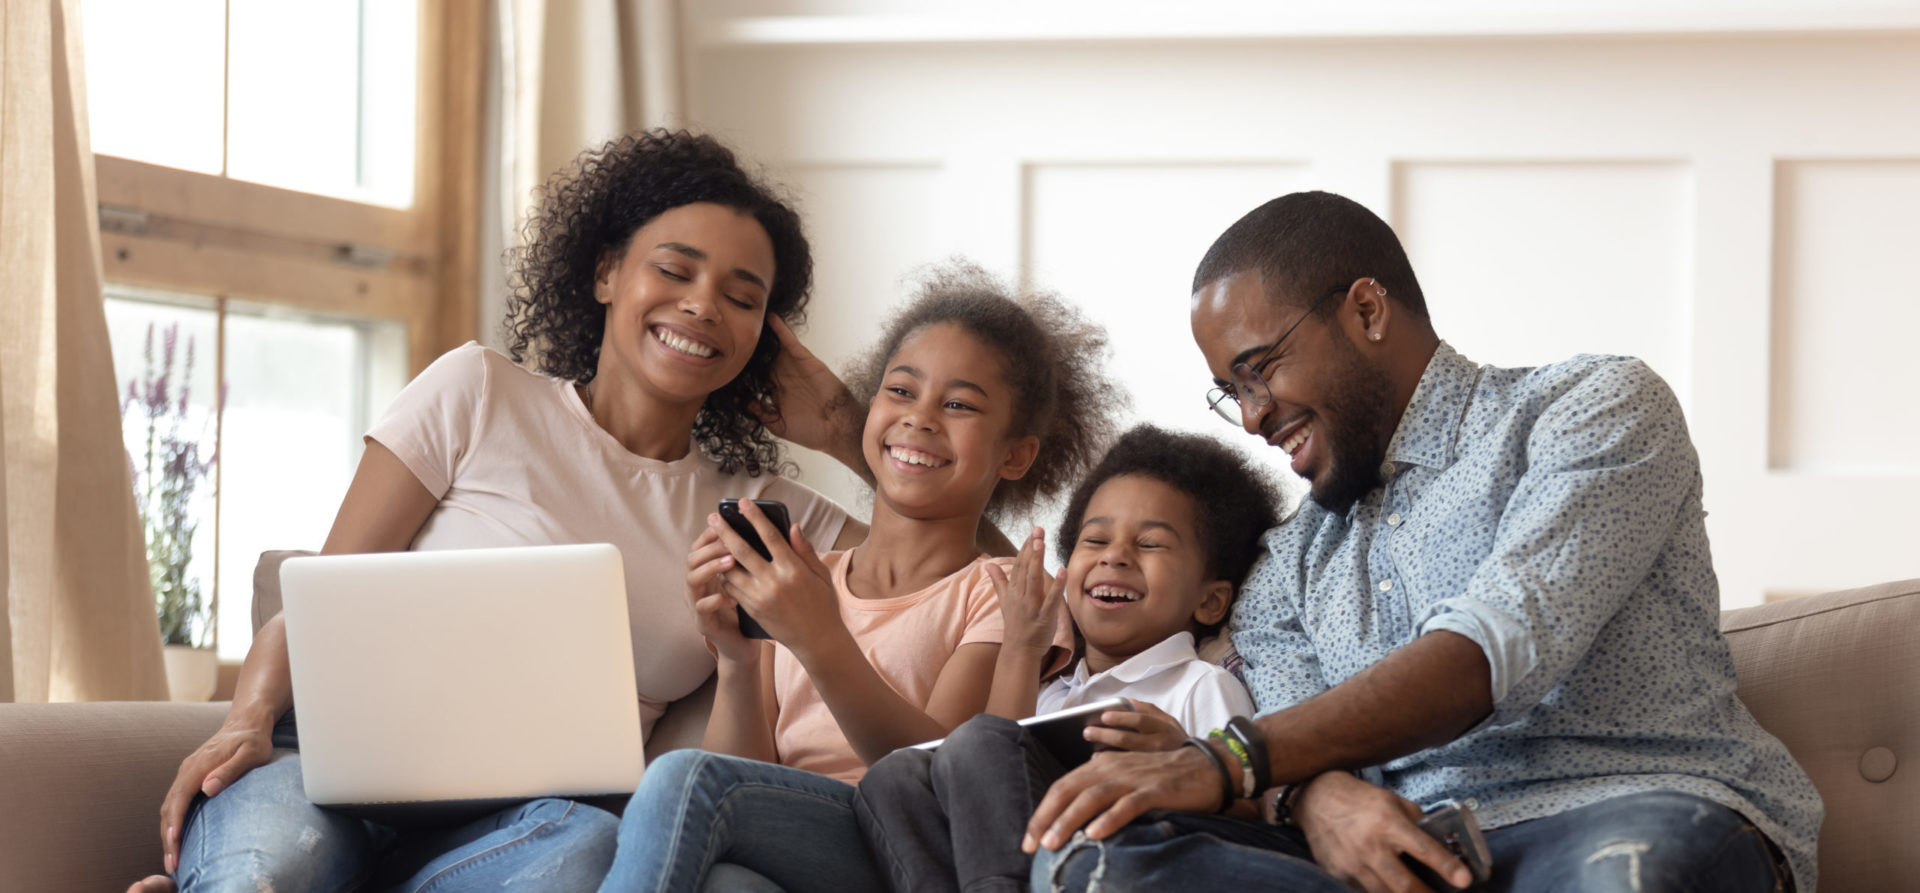 Happy family on couch using laptop, tablet, and smartphone